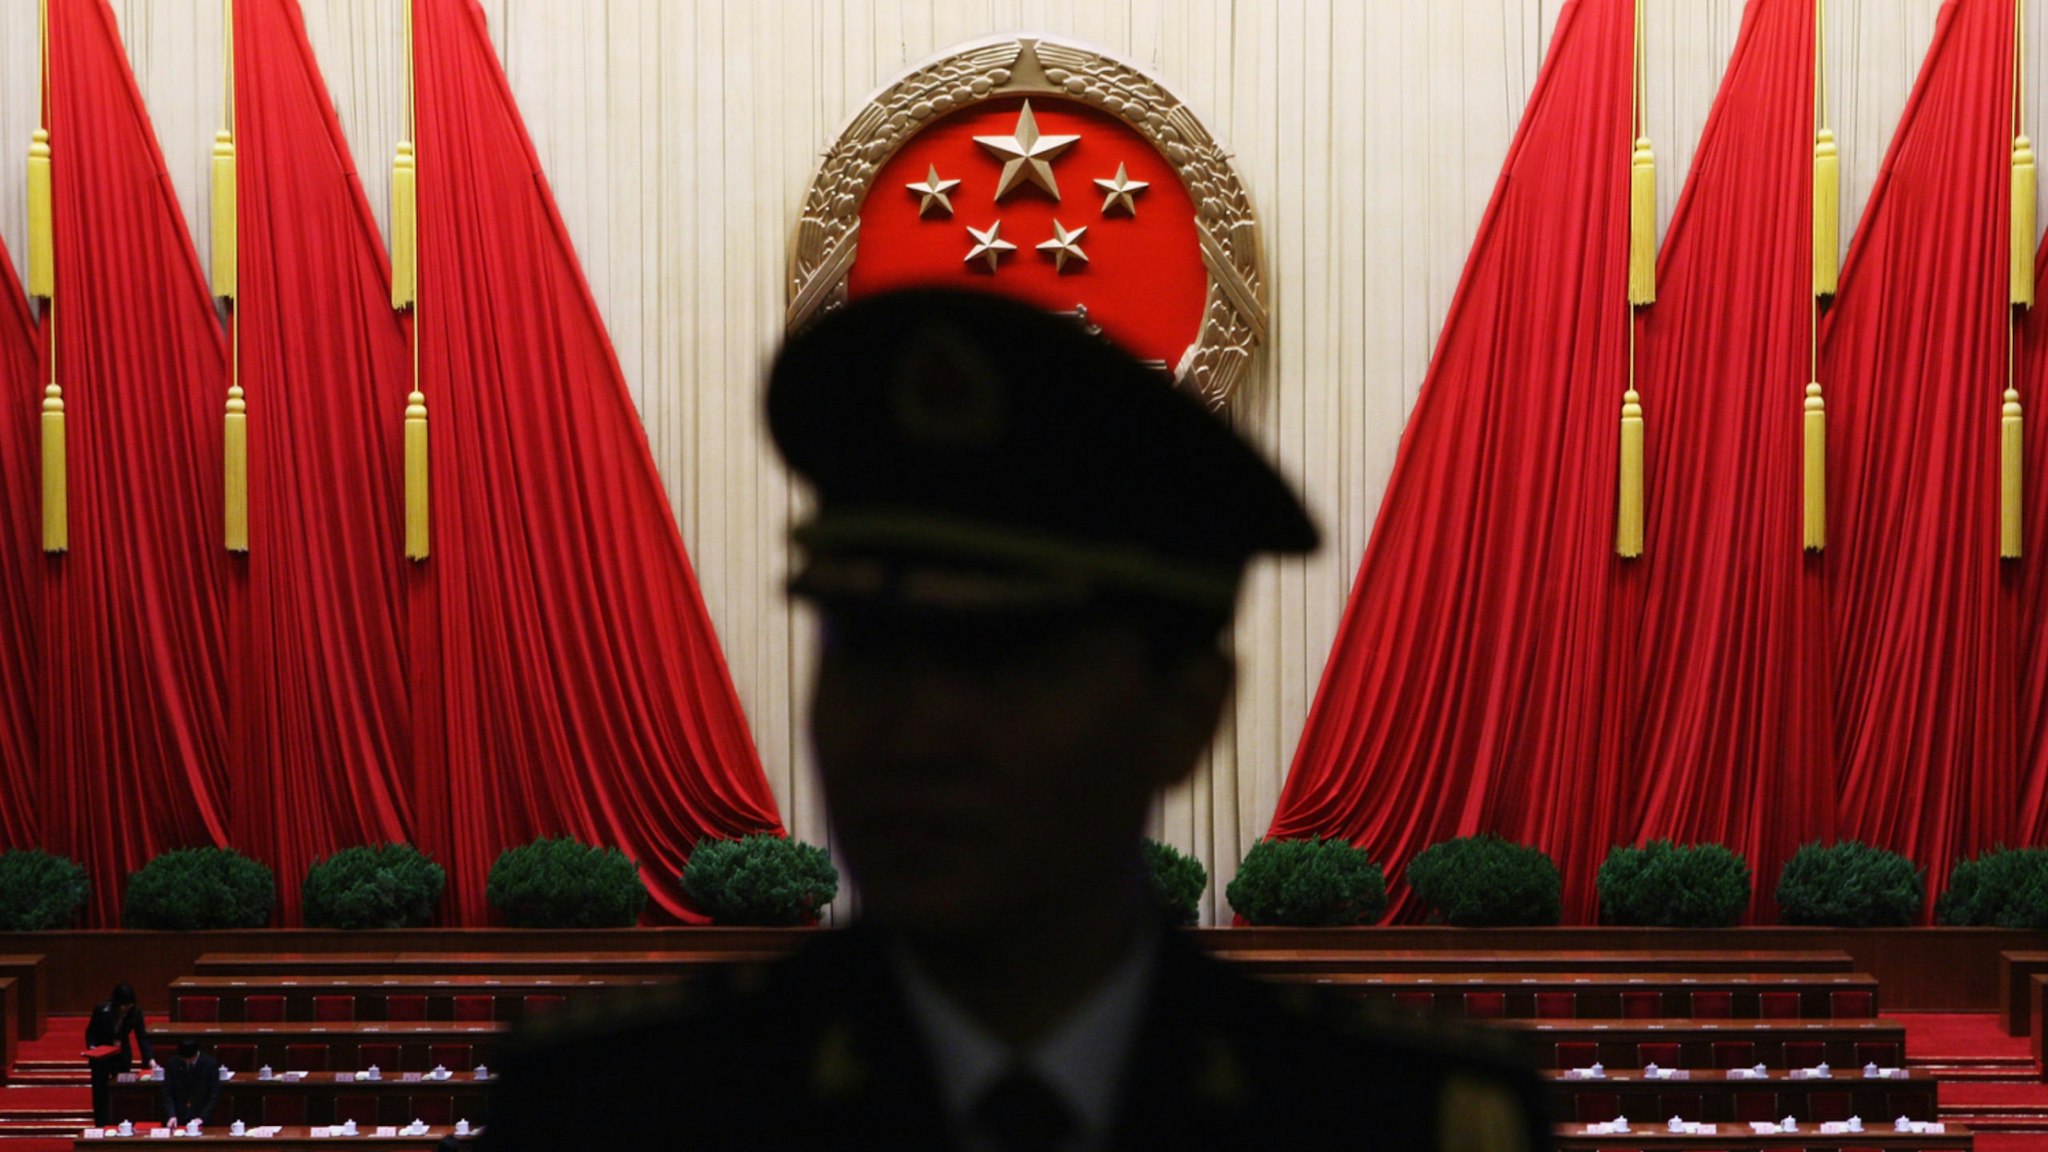 A Chinese military band conductor is seen during a rehearsal before the closing session of the National People's Congress (NPC), or parliament, at the Great Hall of the People on March 13, 2009 in Beijing, China.